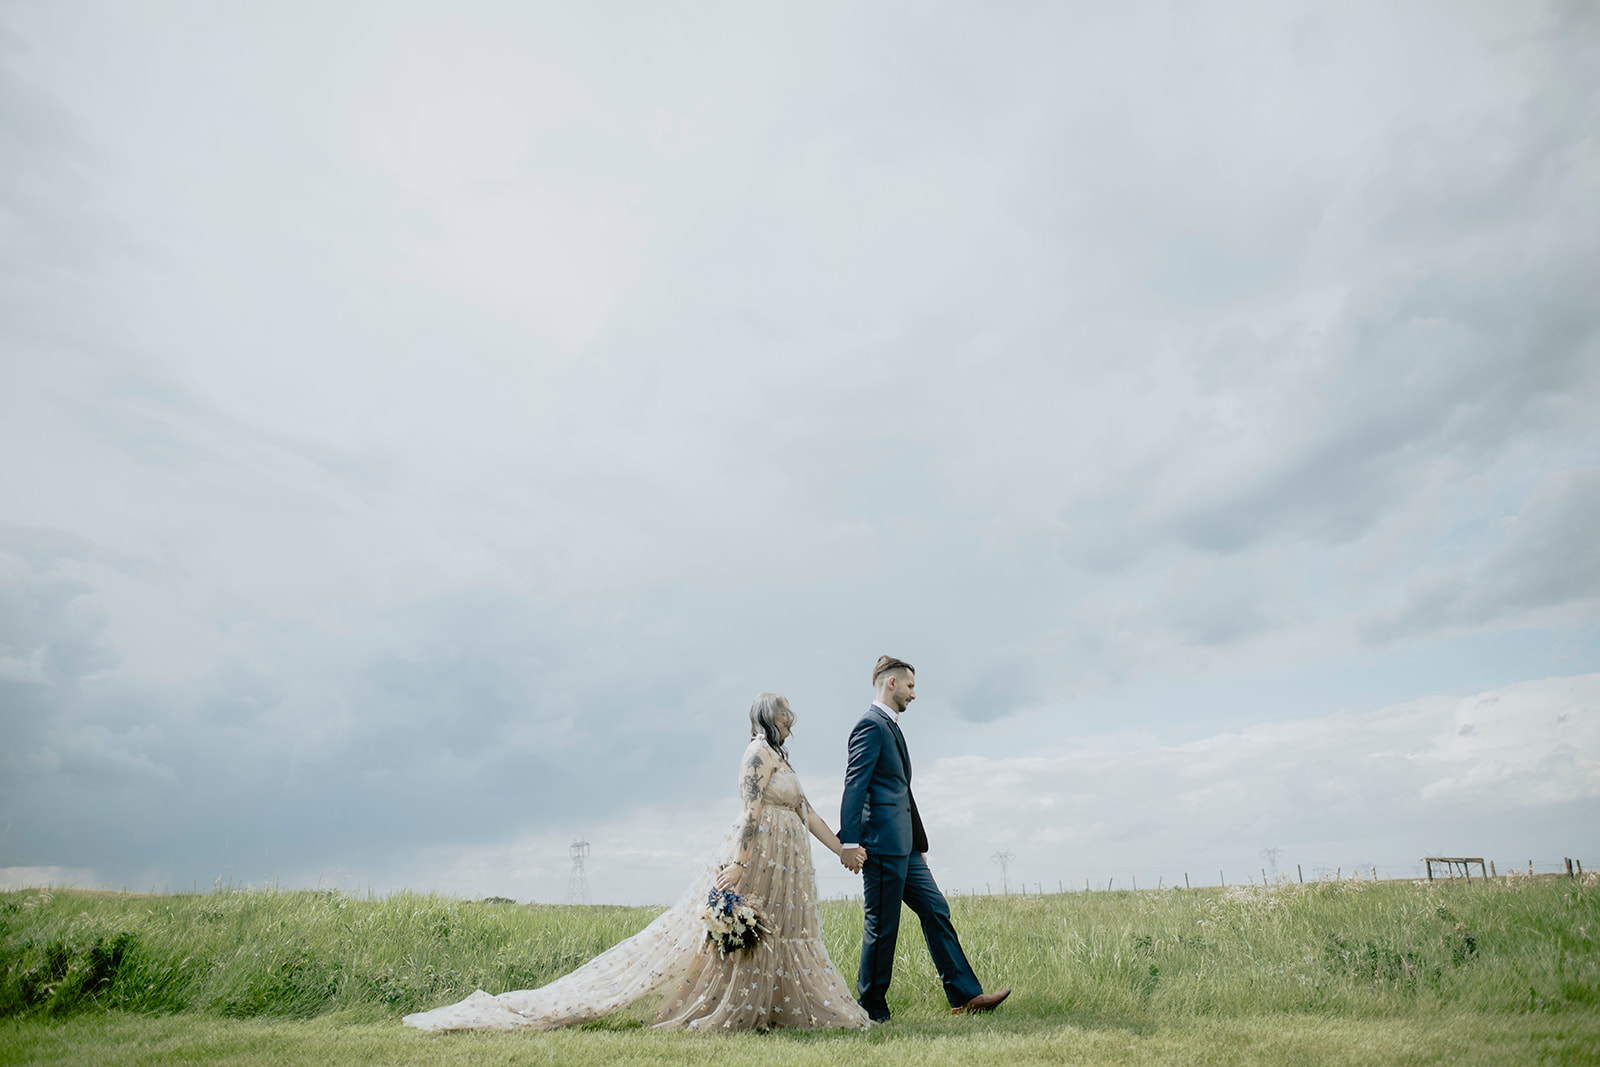 A bride and groom walking in a field under a cloudy sky.